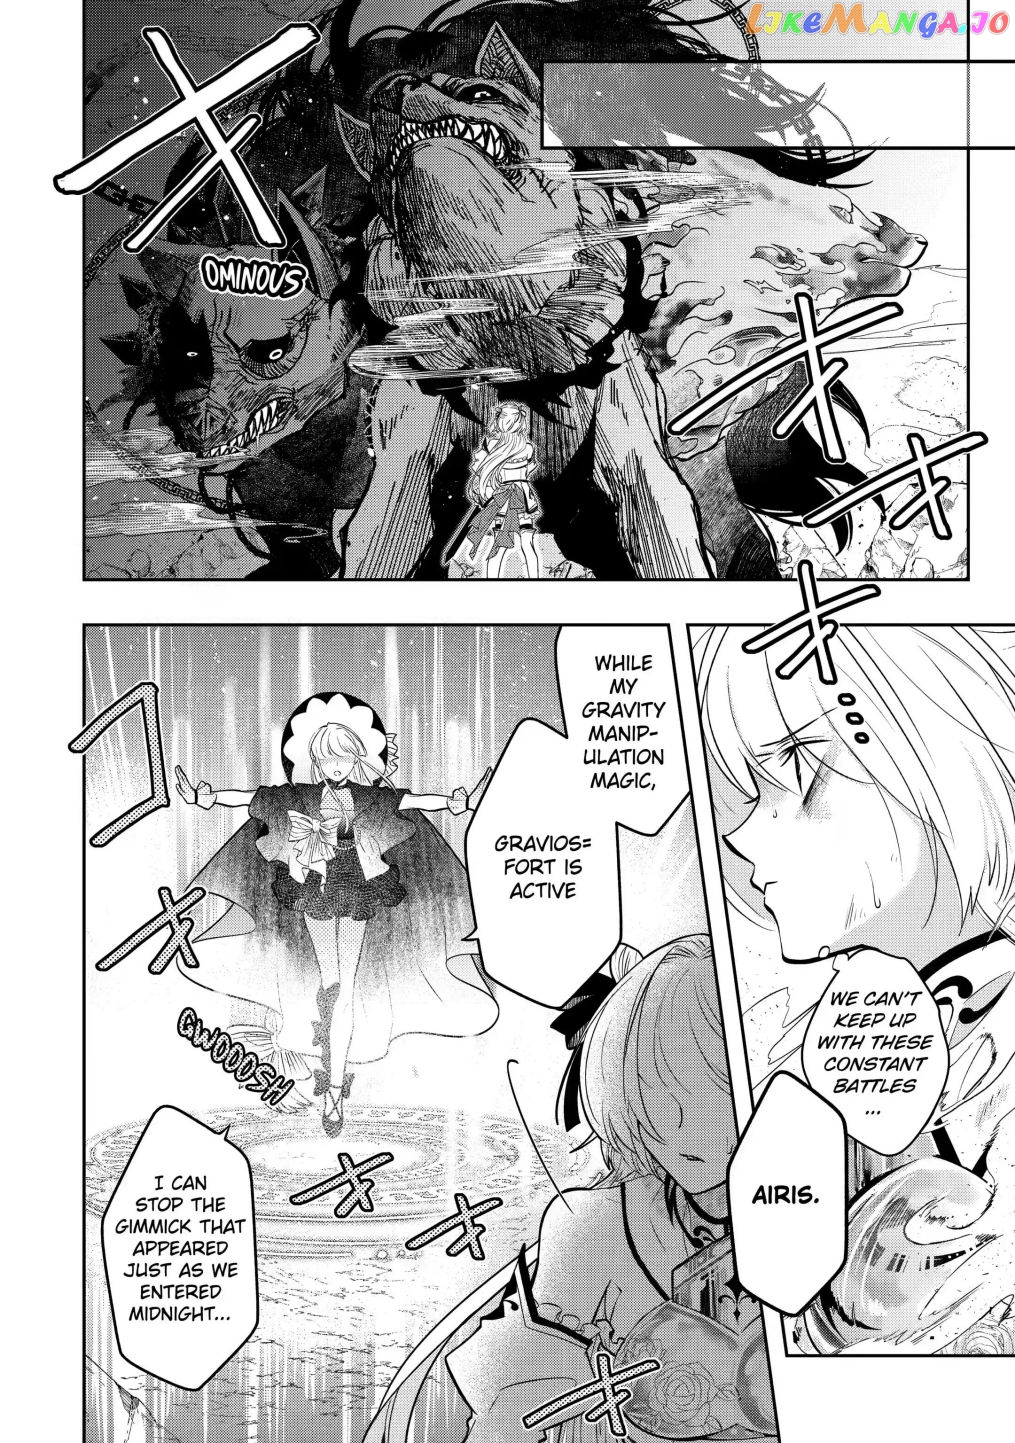 Level 0 Evil King Become the Adventurer In the New World chapter 14.3 - page 4